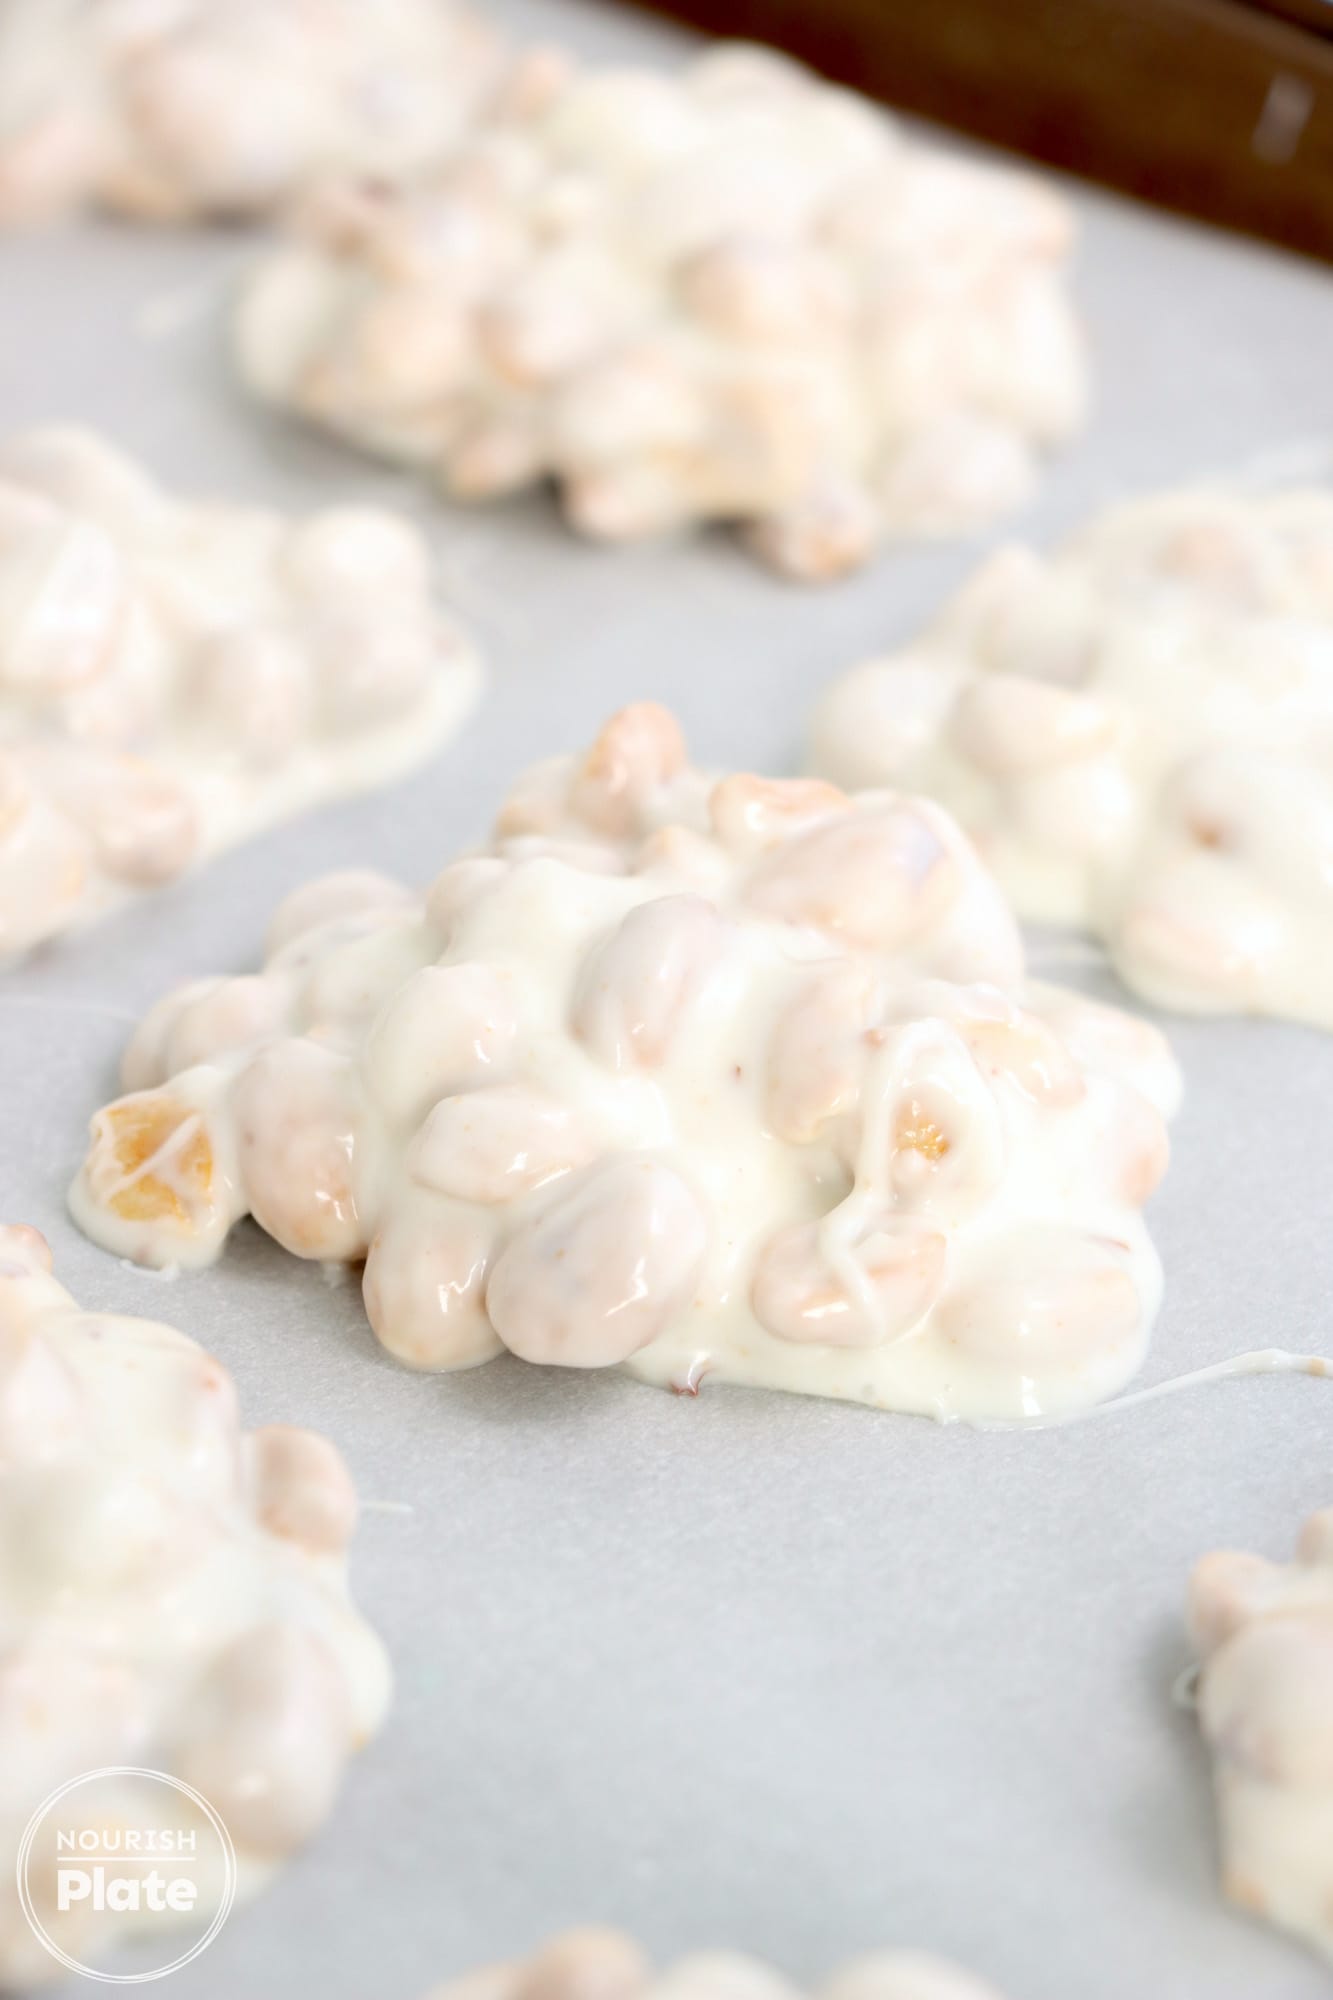 Spooned crockpot candy on parchment paper creating clusters